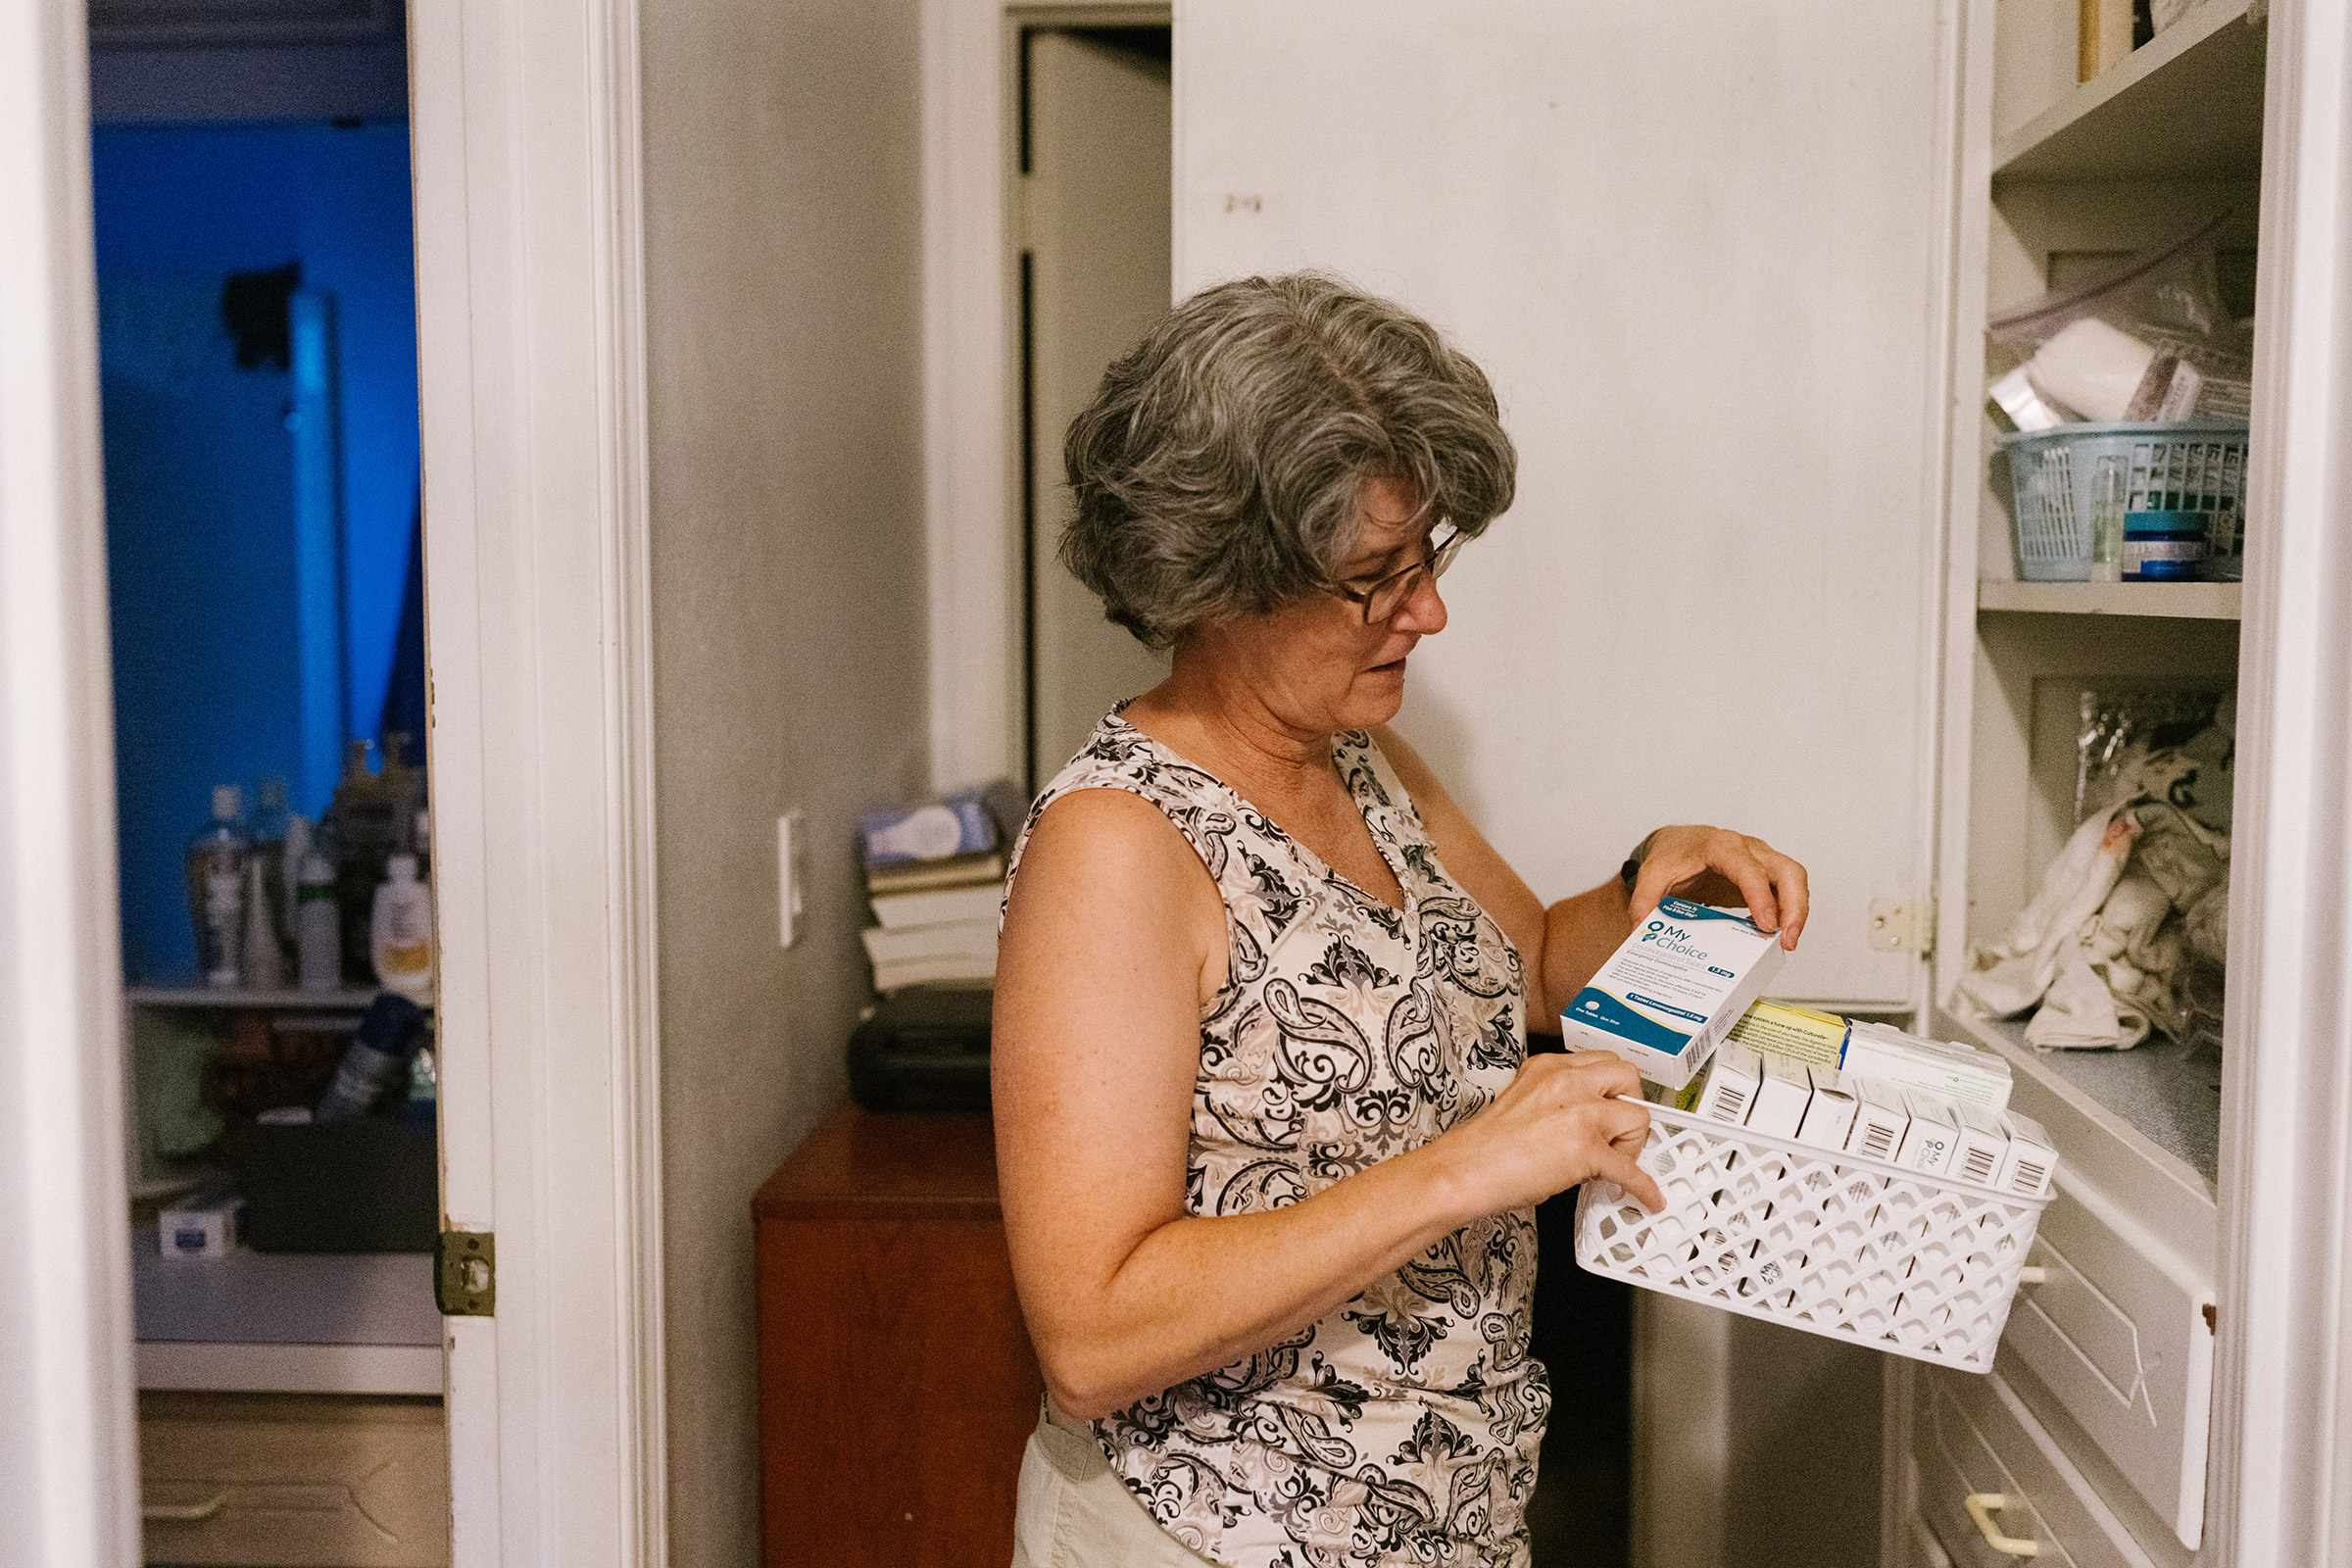 Cynthia Rogers, Ellis's mother, looks through the medicine cabinet in her home to find the morning-after pills she keeps for Ellis and her friends in case of emergencies. (Morgan Lieberman)